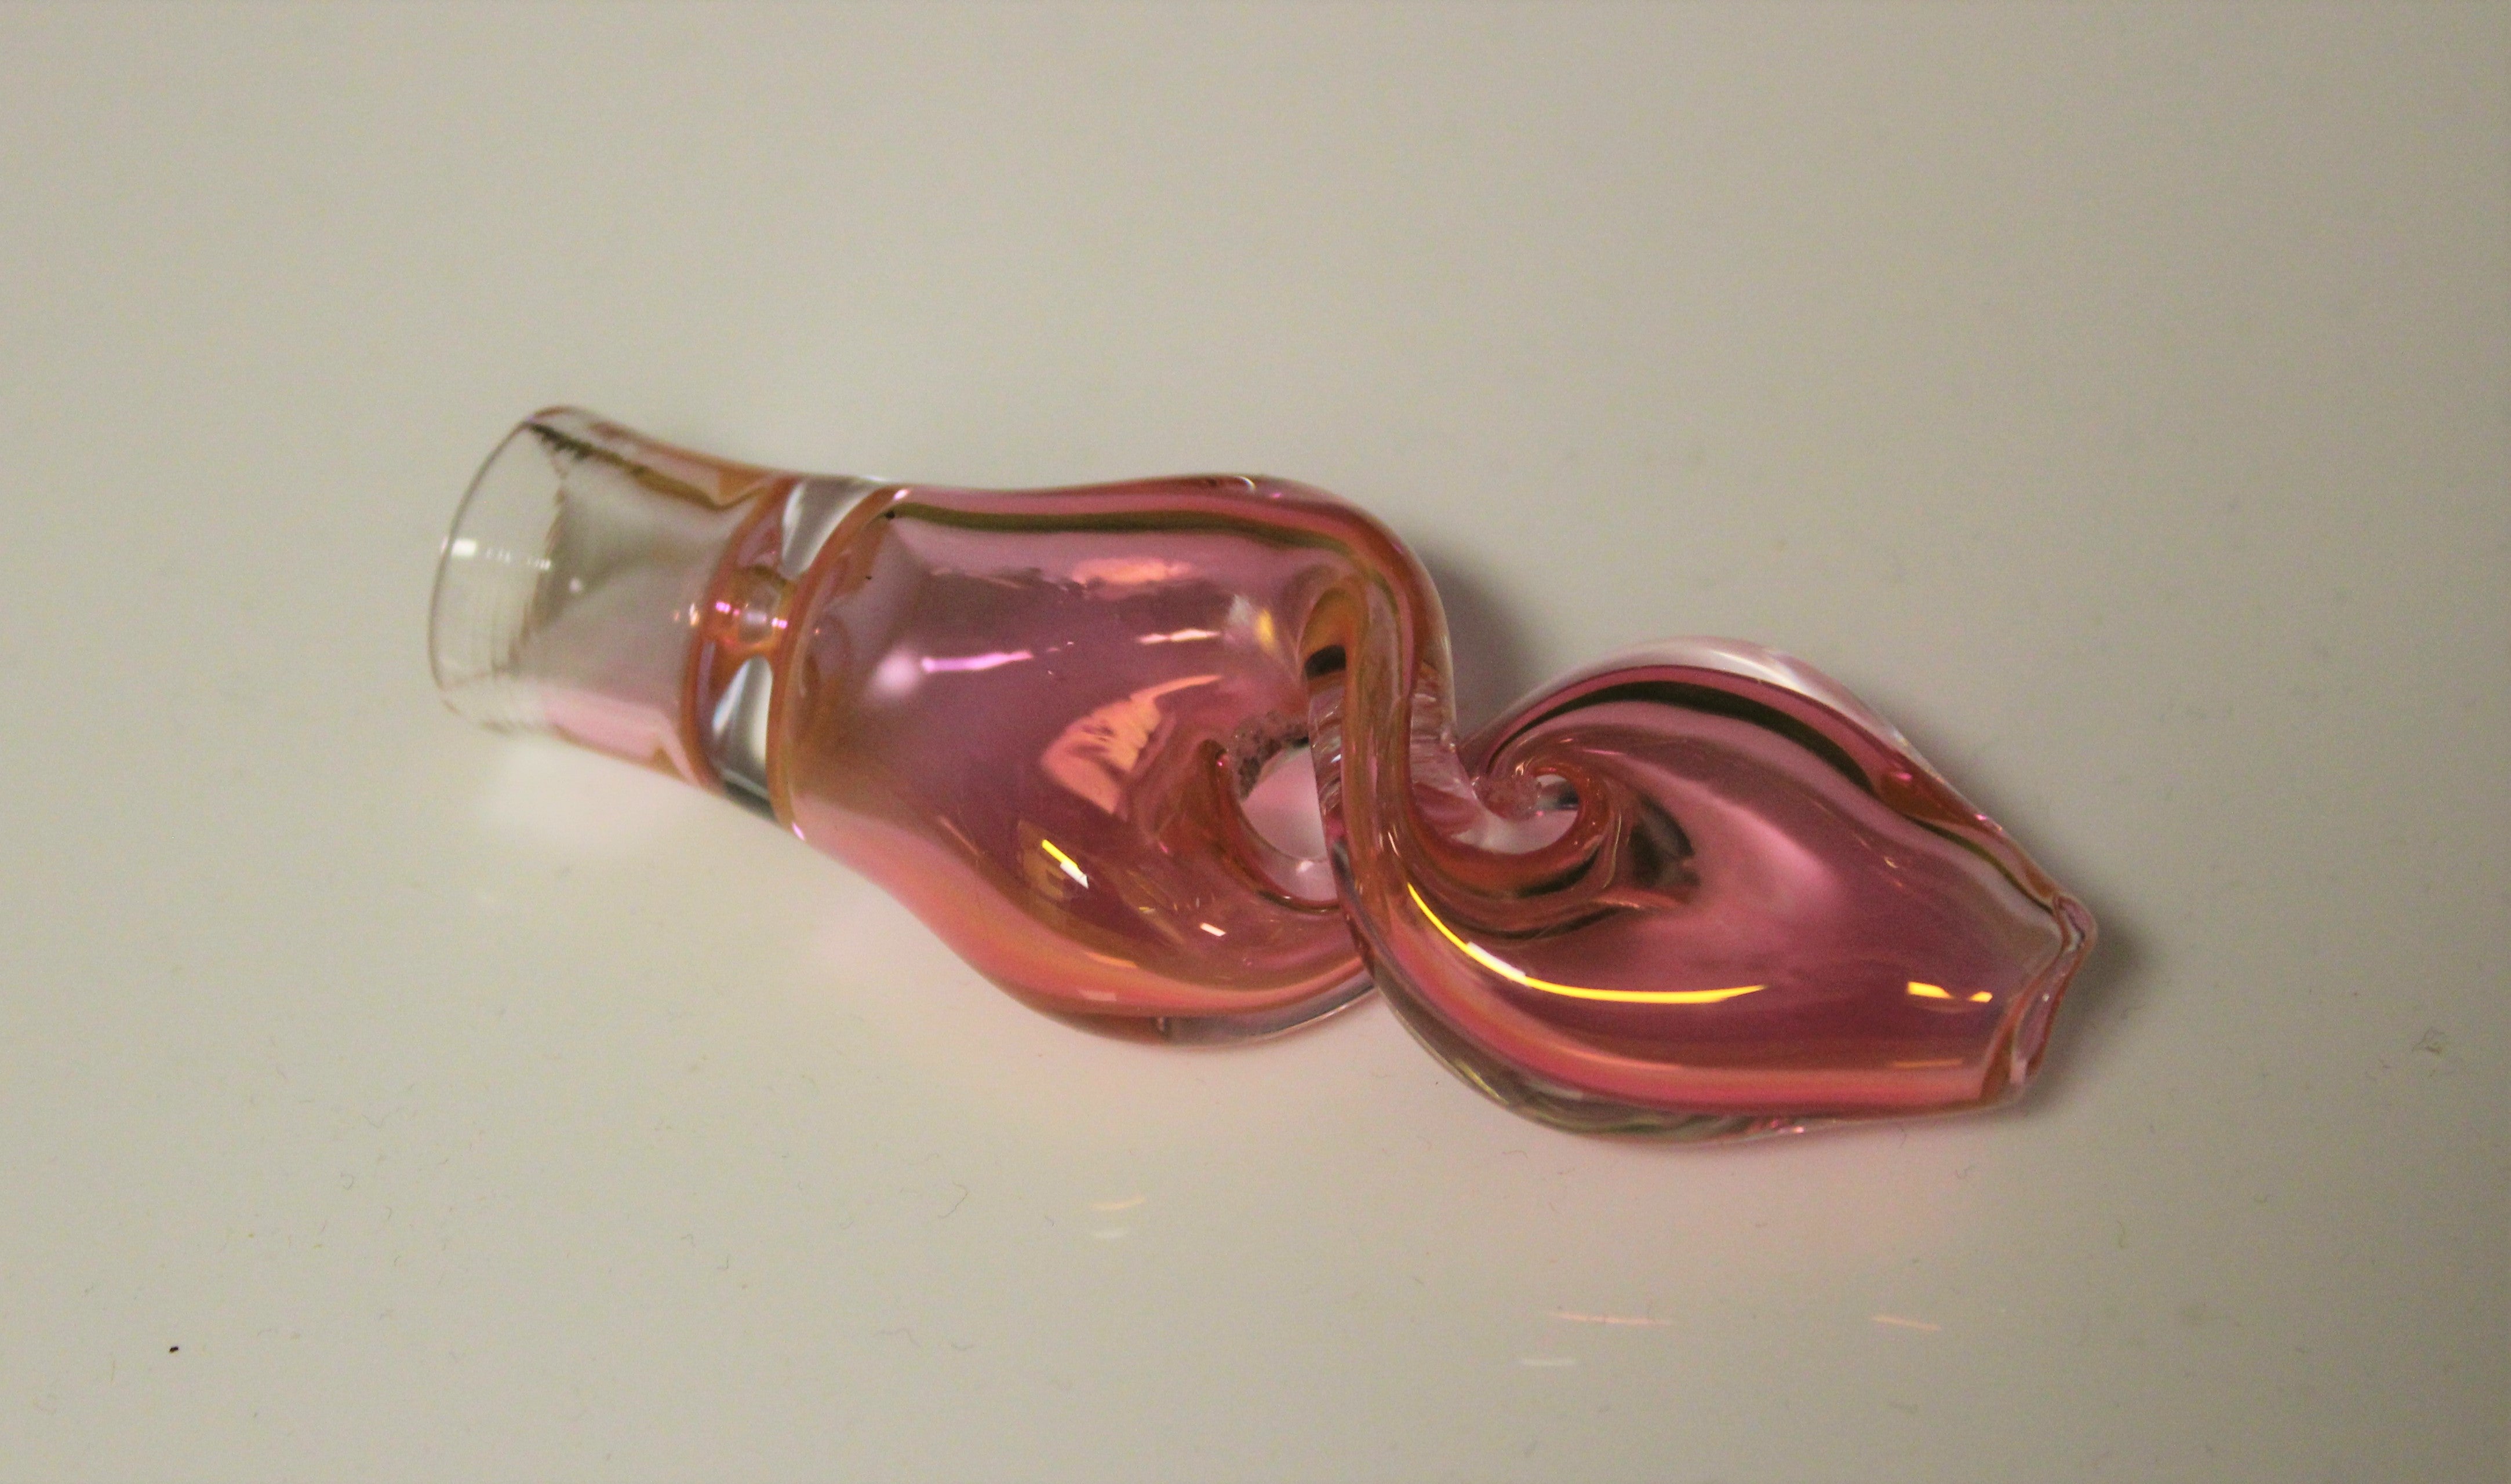 NEVER ENDING HITTER One Hitter Tobacco Smoking Glass Pipe One Hit